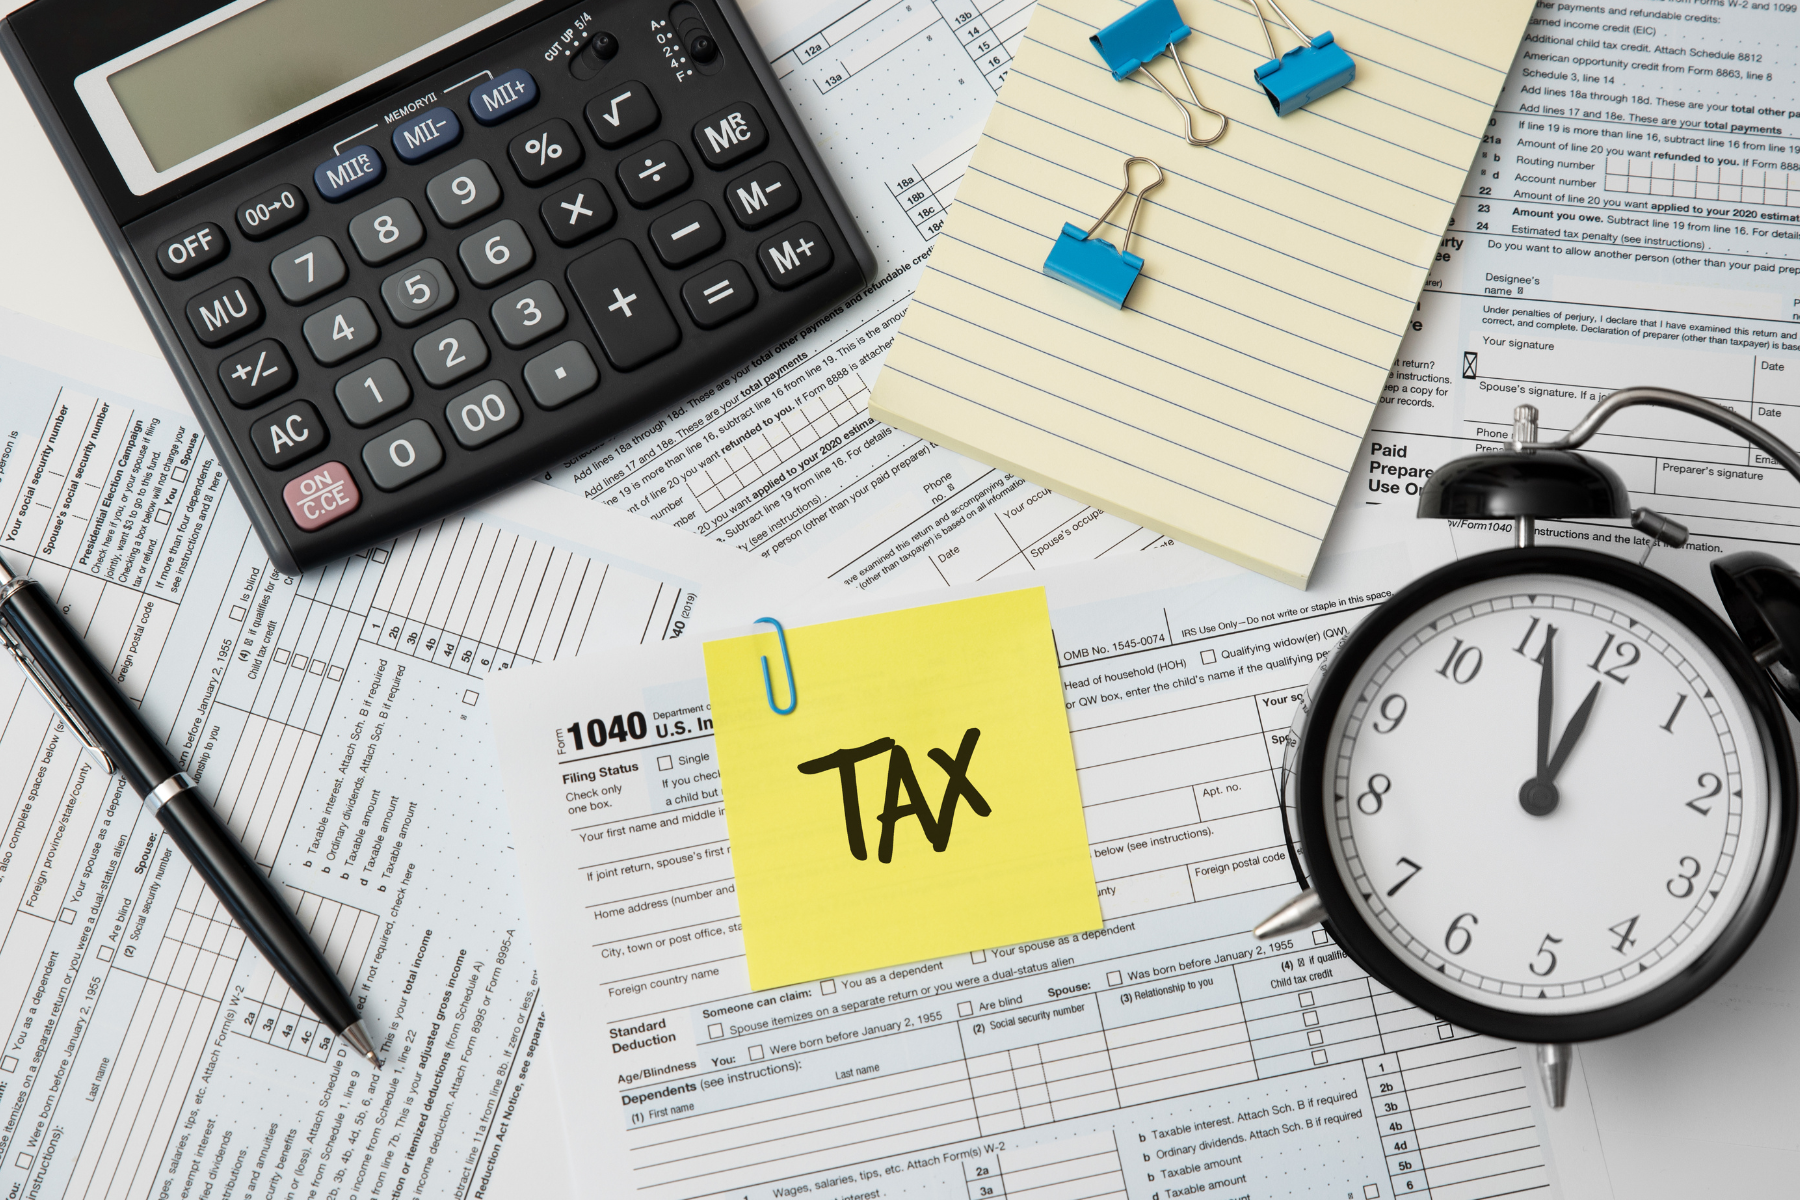 What Tax Forms Will My Property Manager Provide? A Guide for San Diego Landlords